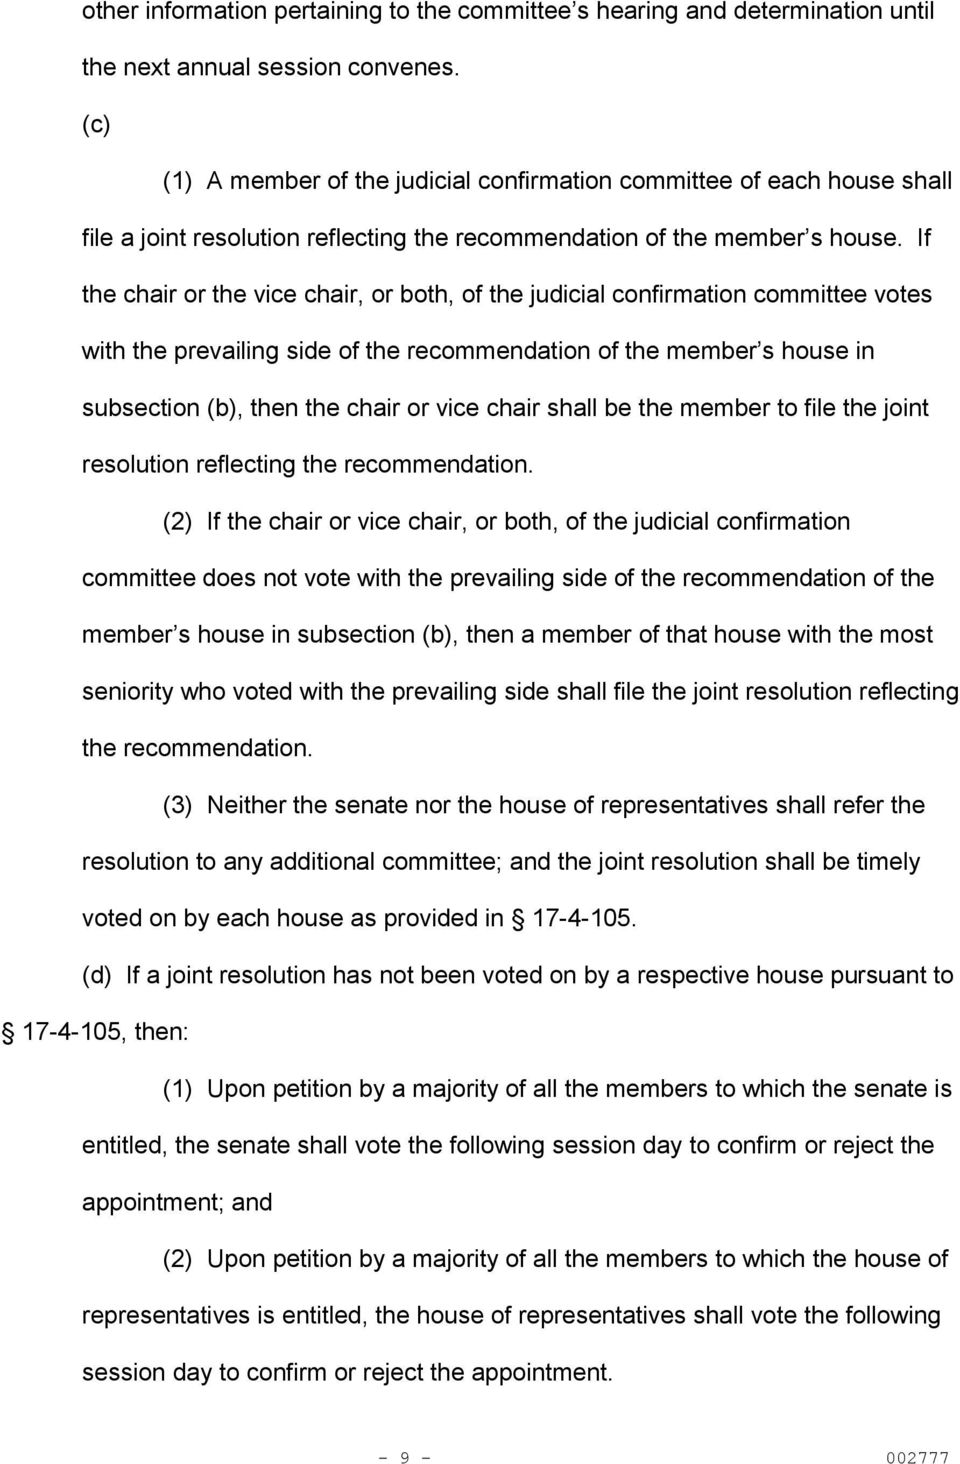 If the chair or the vice chair, or both, of the judicial confirmation committee votes with the prevailing side of the recommendation of the member s house in subsection (b), then the chair or vice